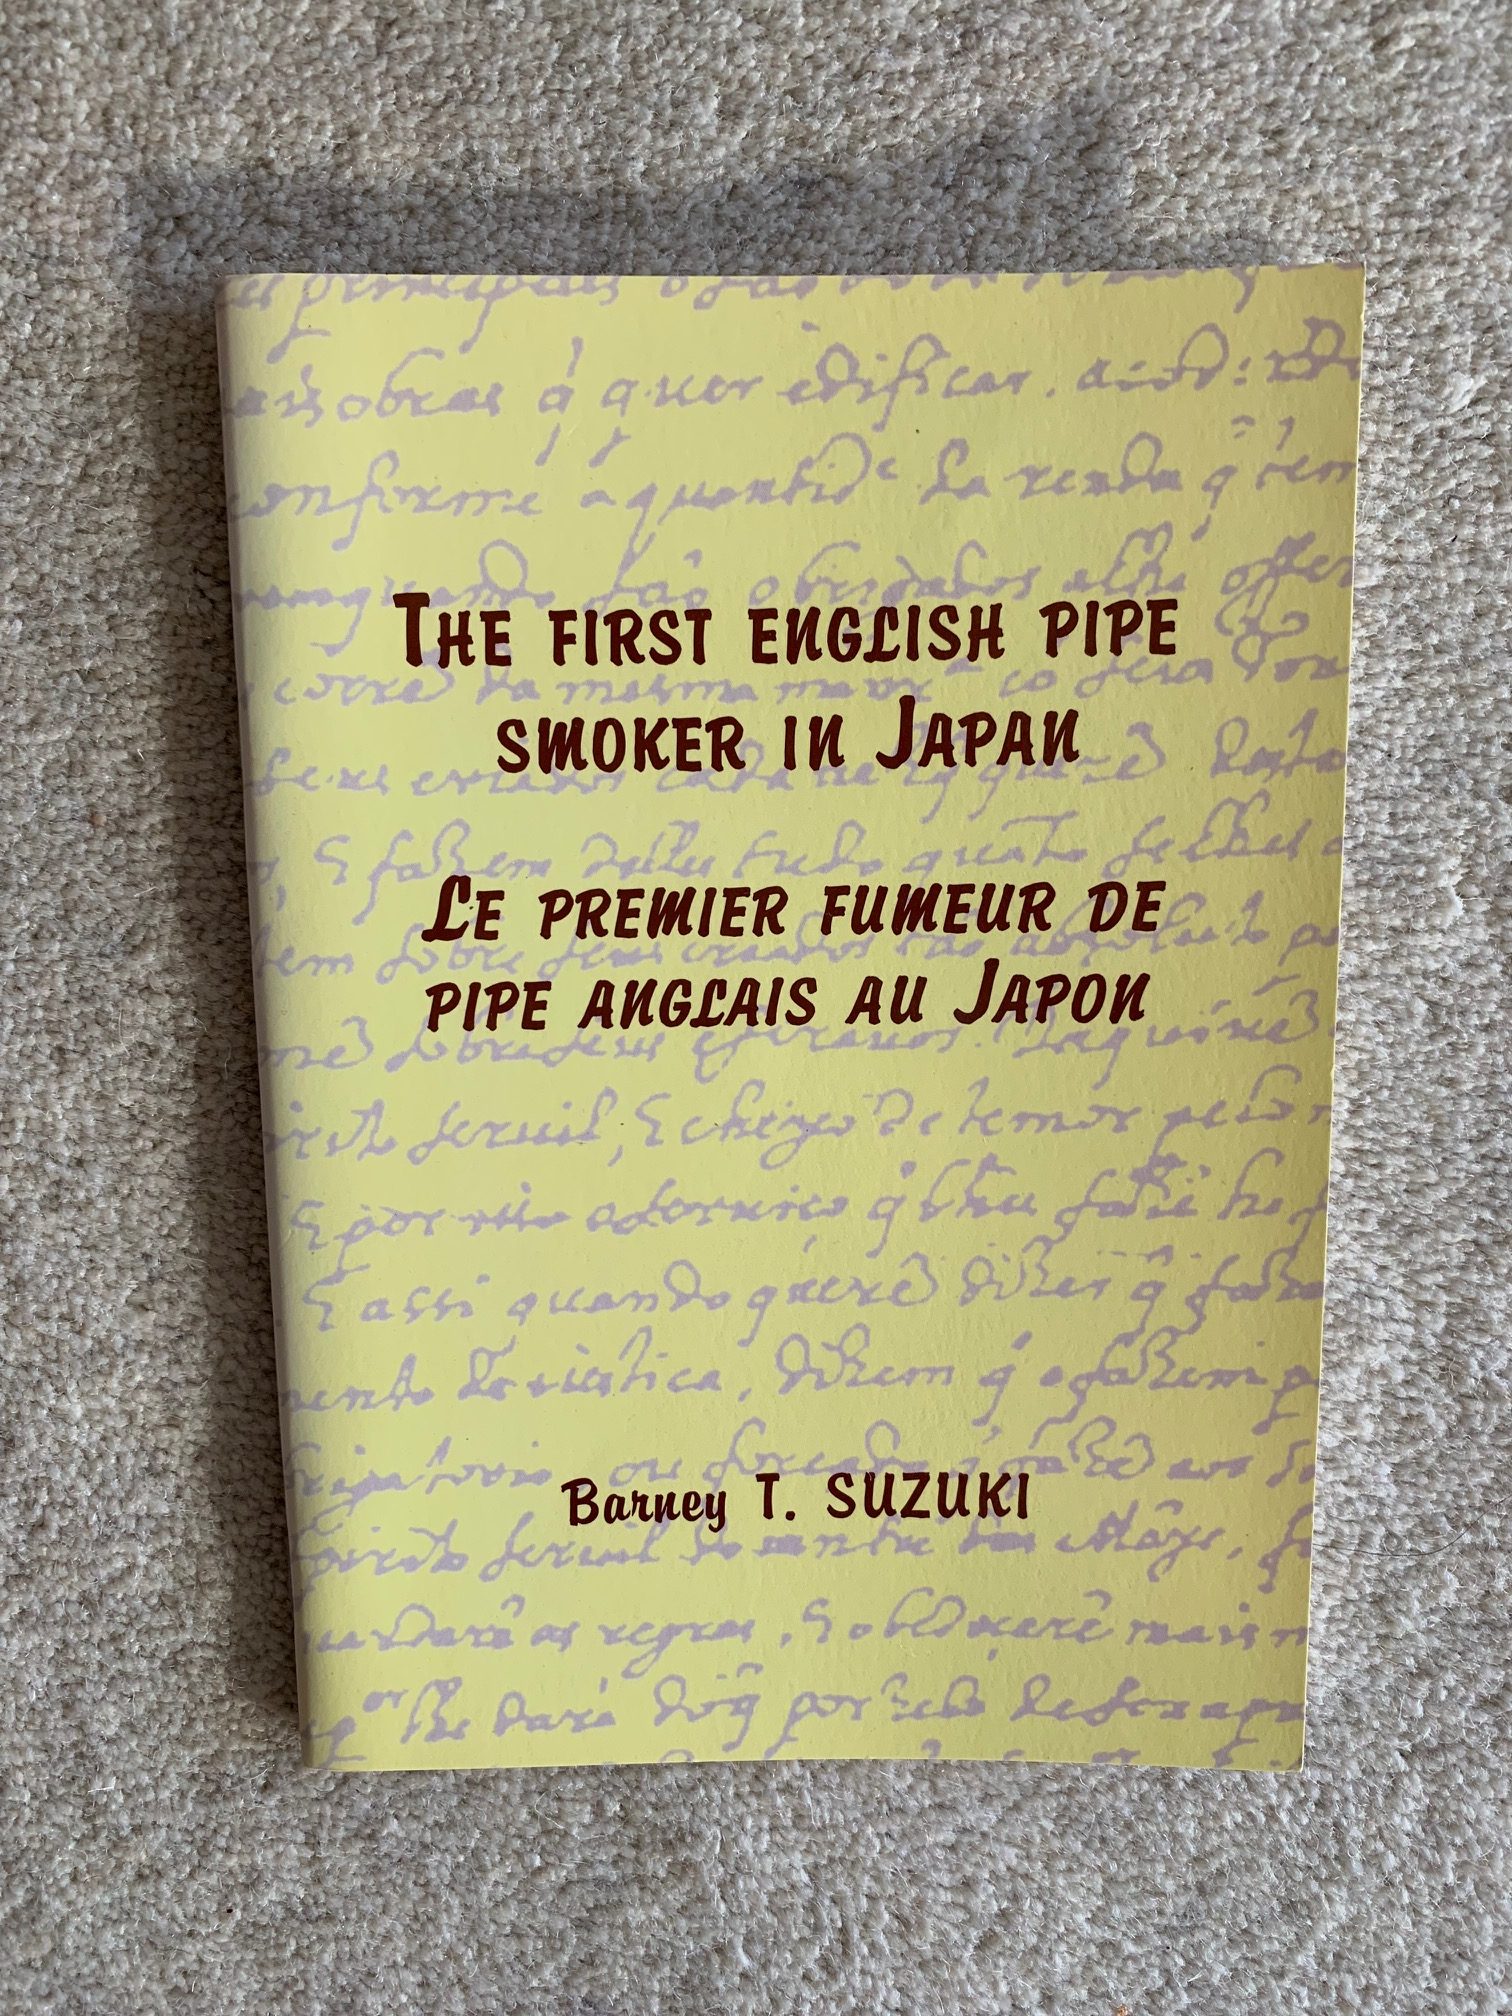 The First English Pipe Smoker in Japan Image